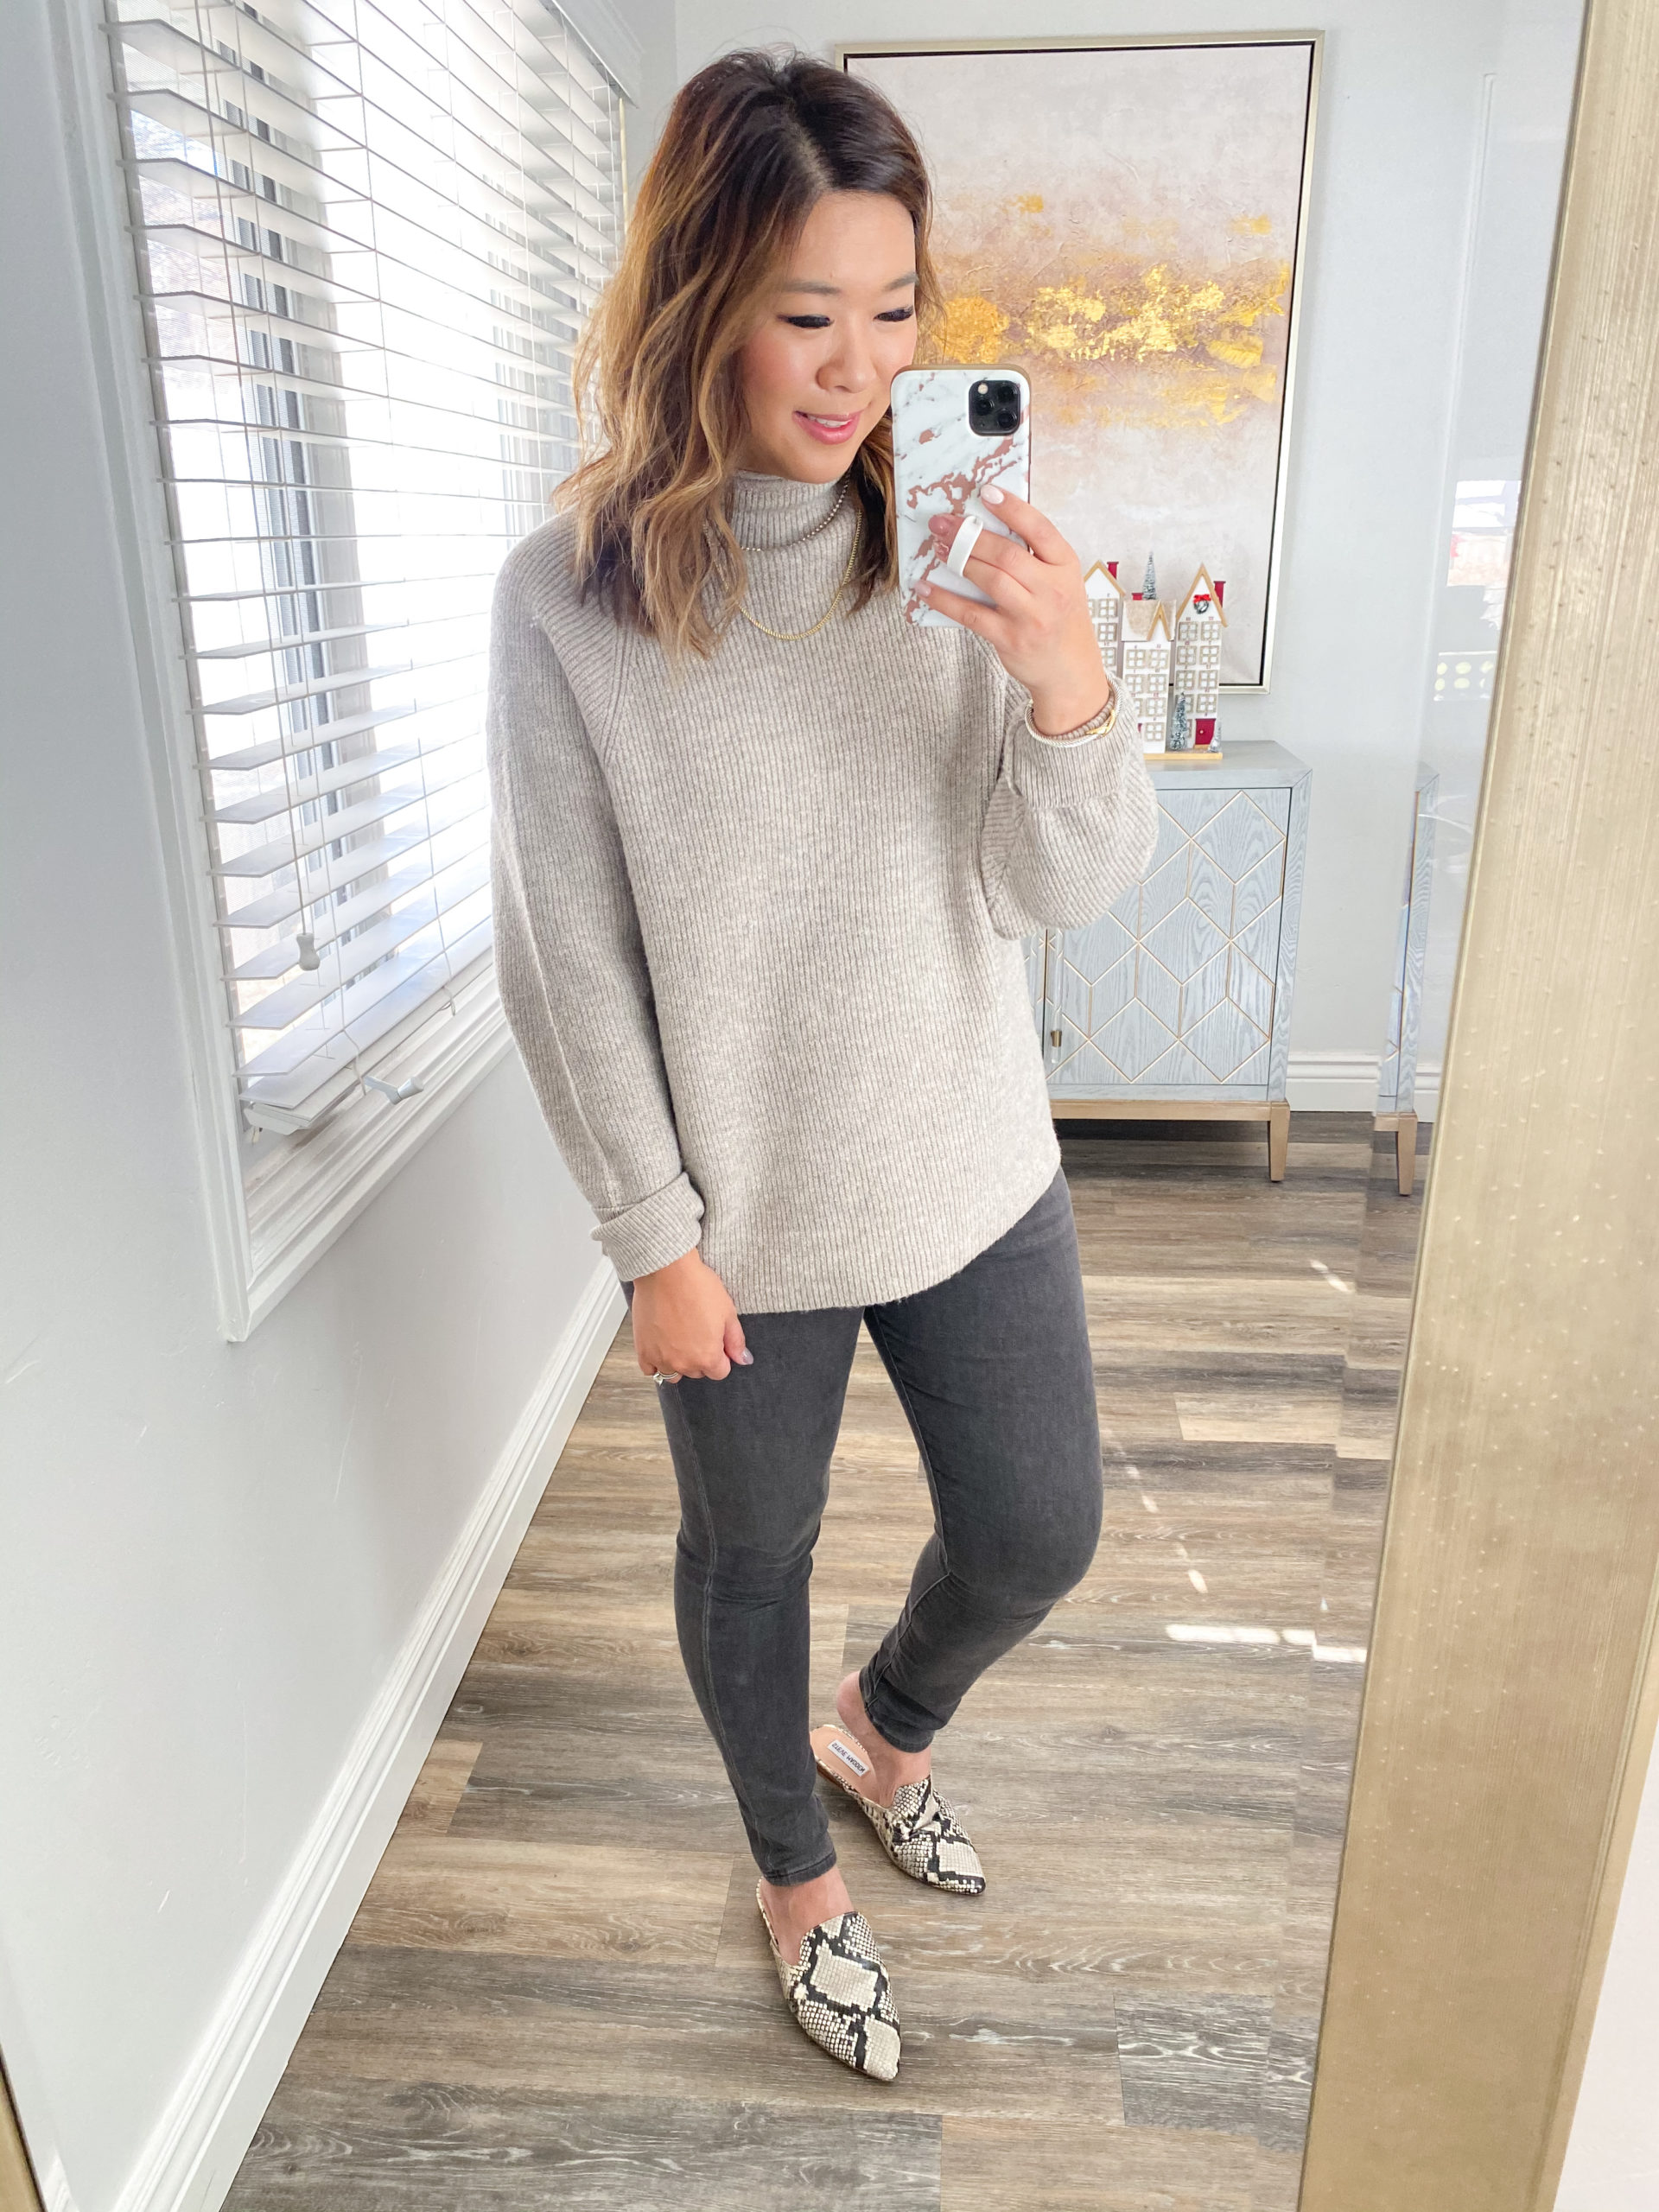 Cozy Fall Outfits from Express | SandyALaMode